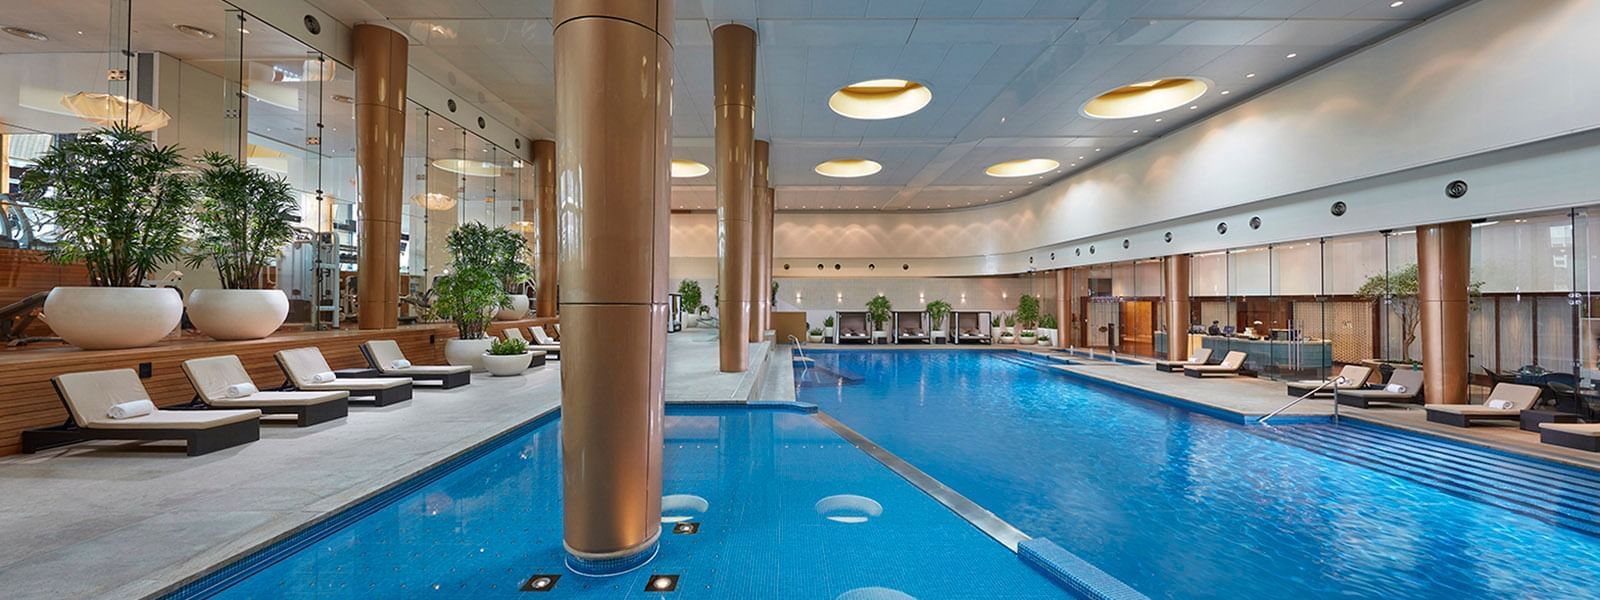 Indoor swimming pool with sunbeds at Crown Hotels Group